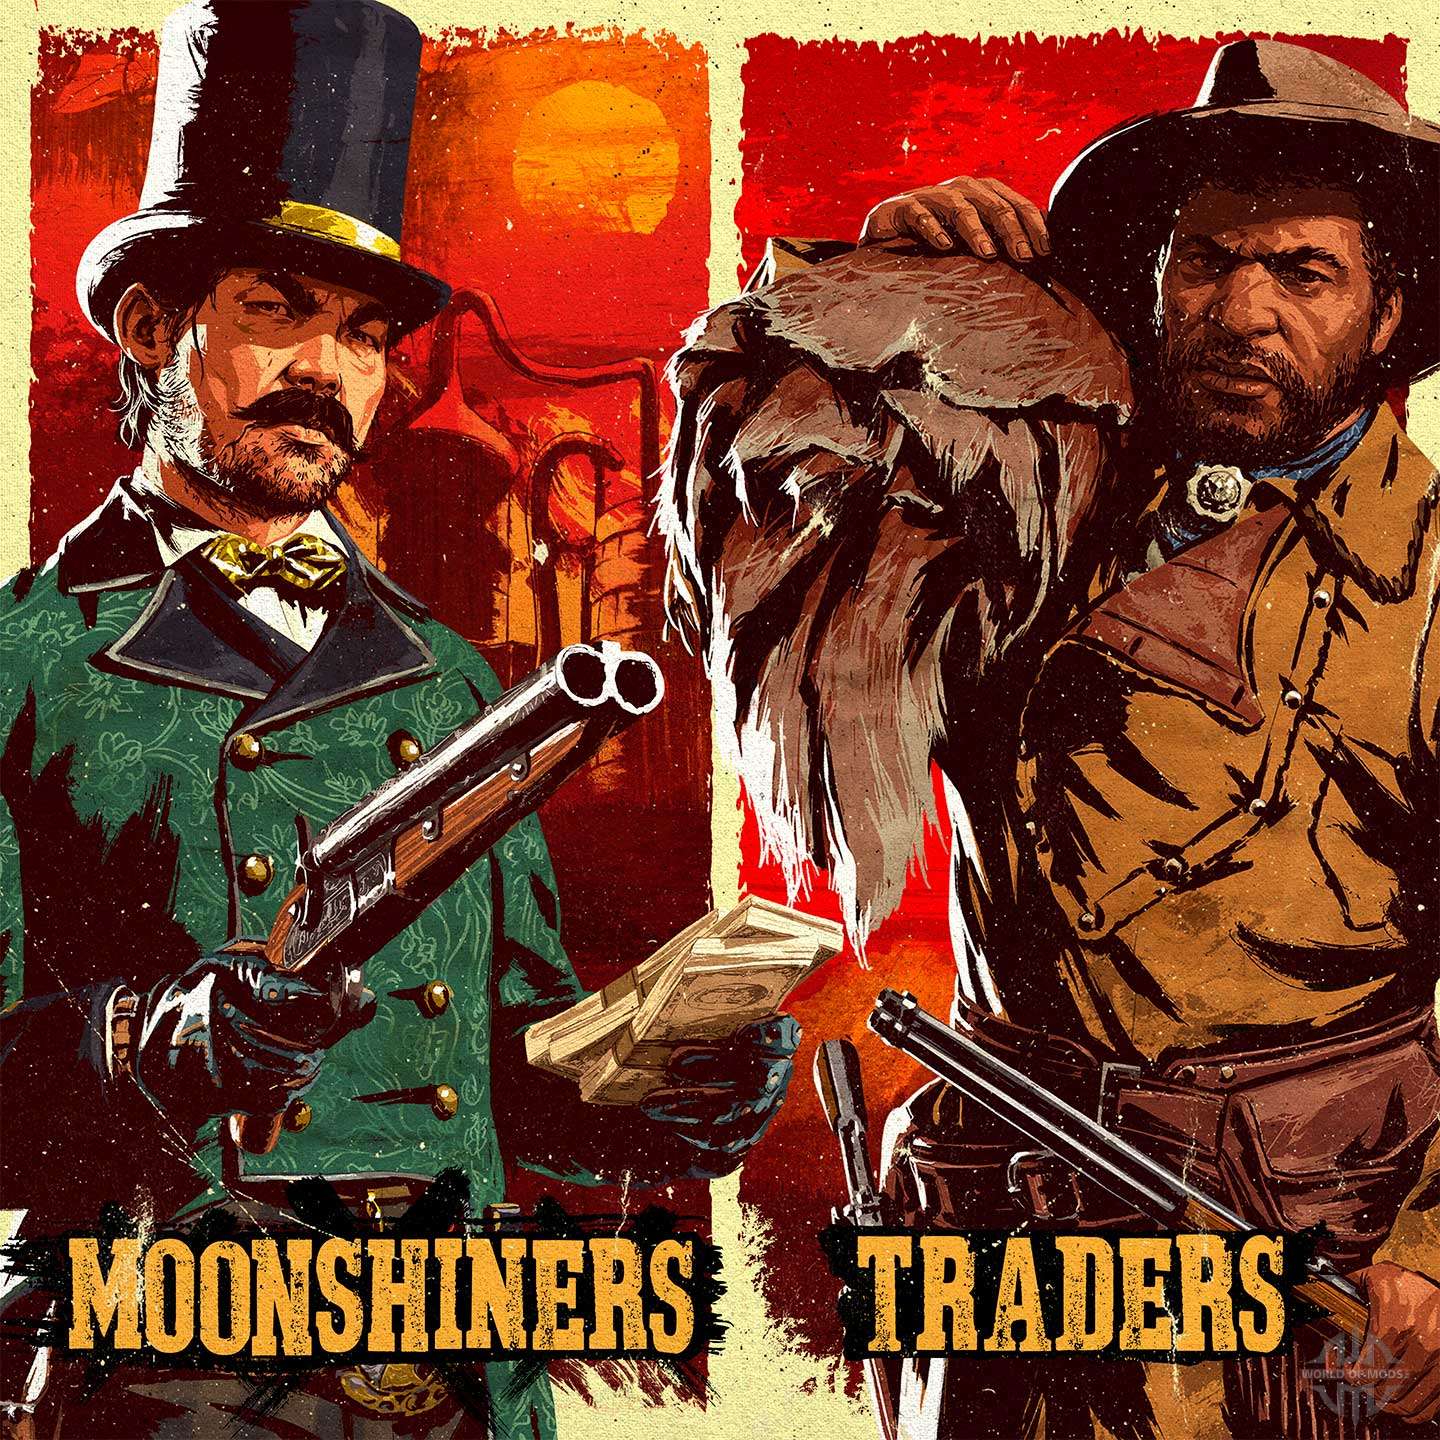 Traders and moonshiners in Red Dead Online